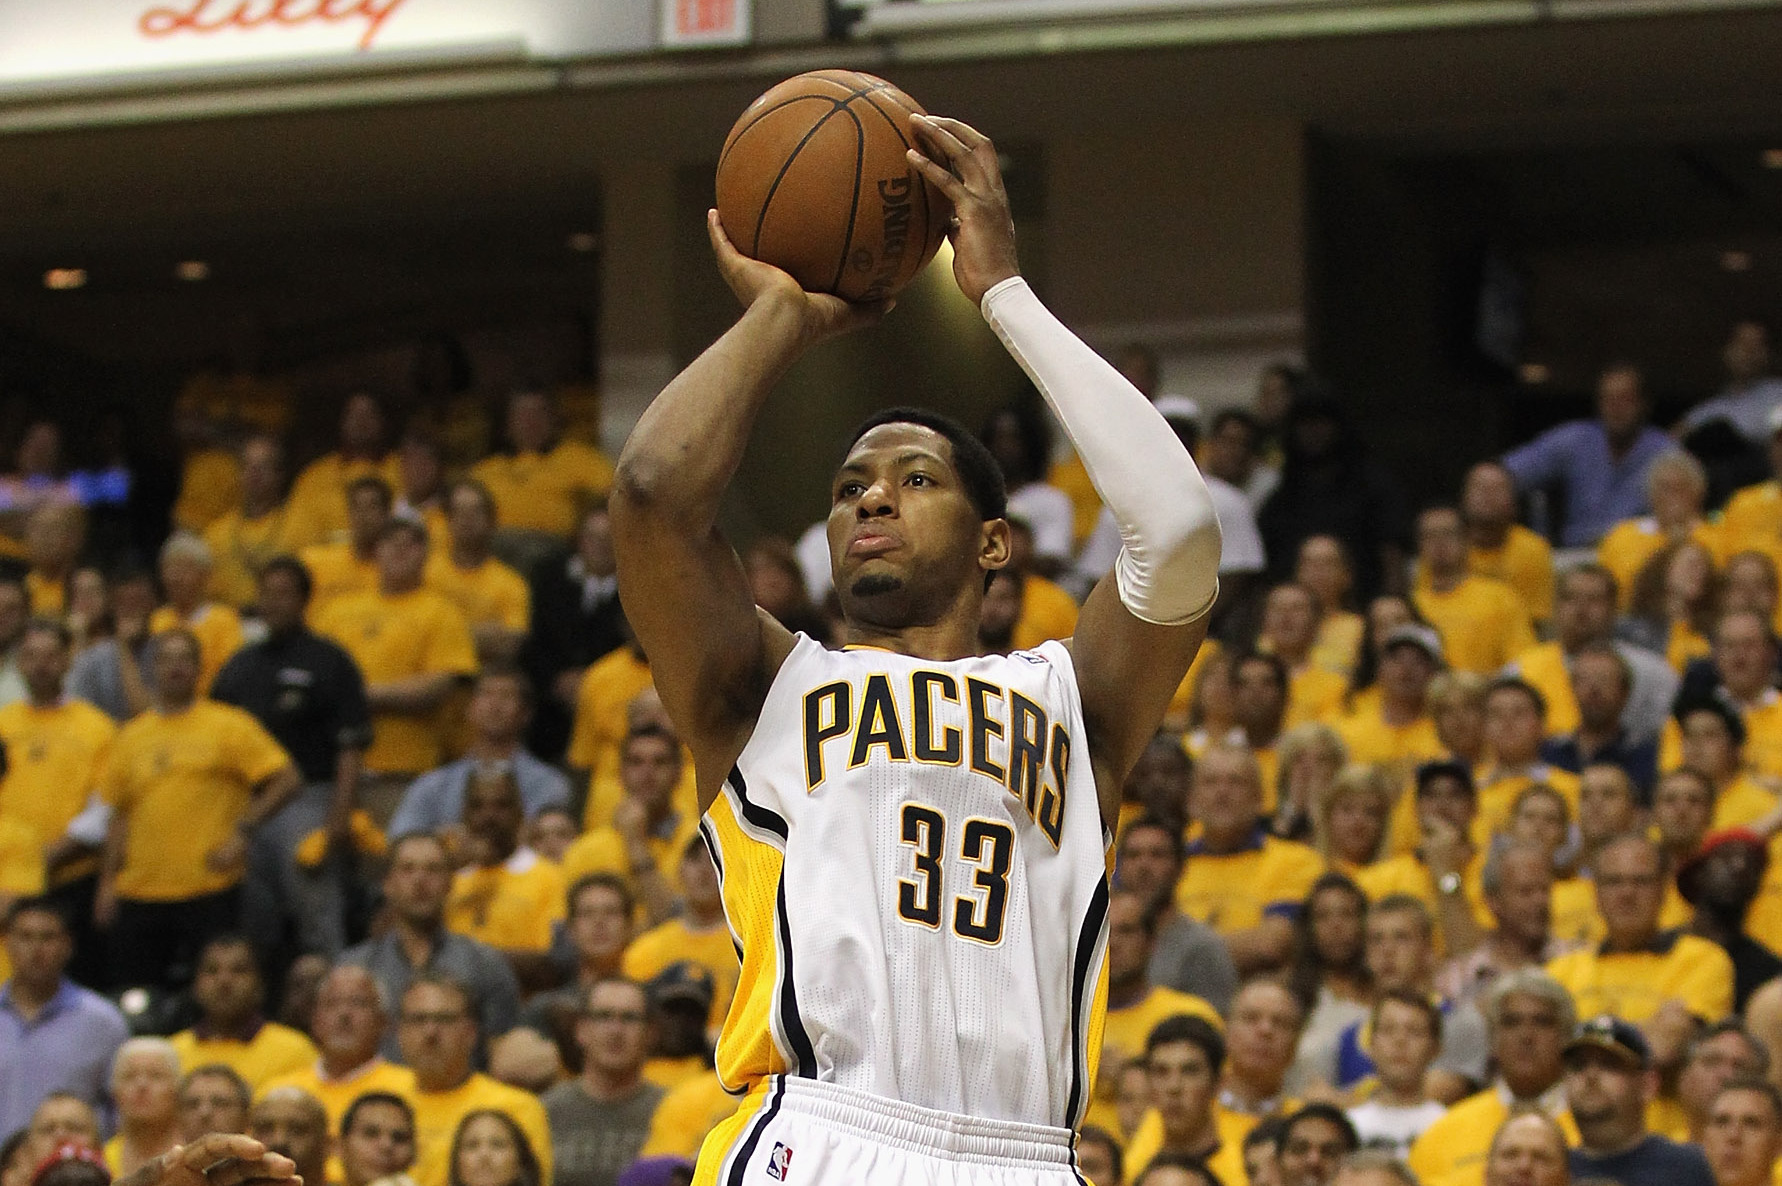 Former Indiana Pacers star Danny Granger